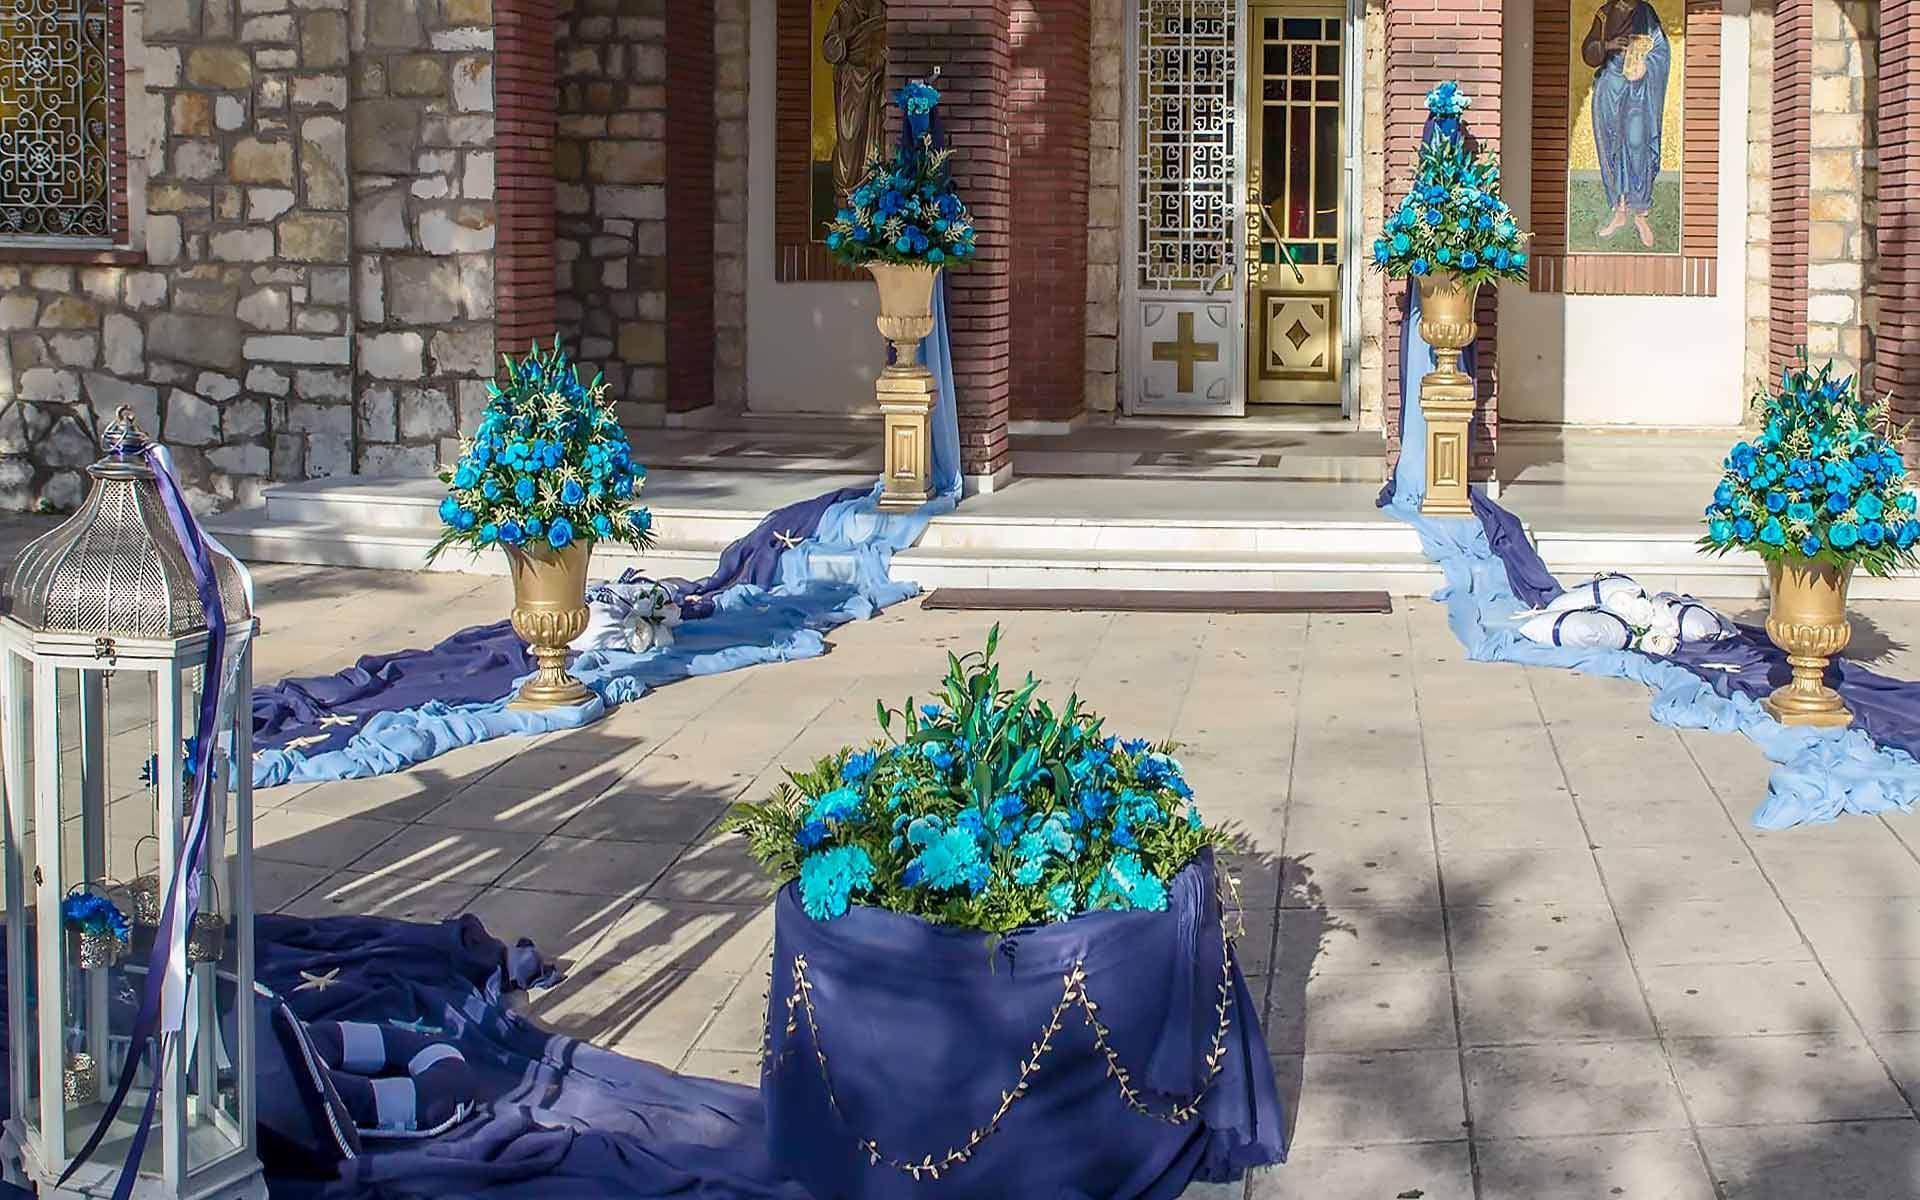 Golden-Columns-With-Flowers-In-Shades-Of-Blue-by-Diamond-Events-christening